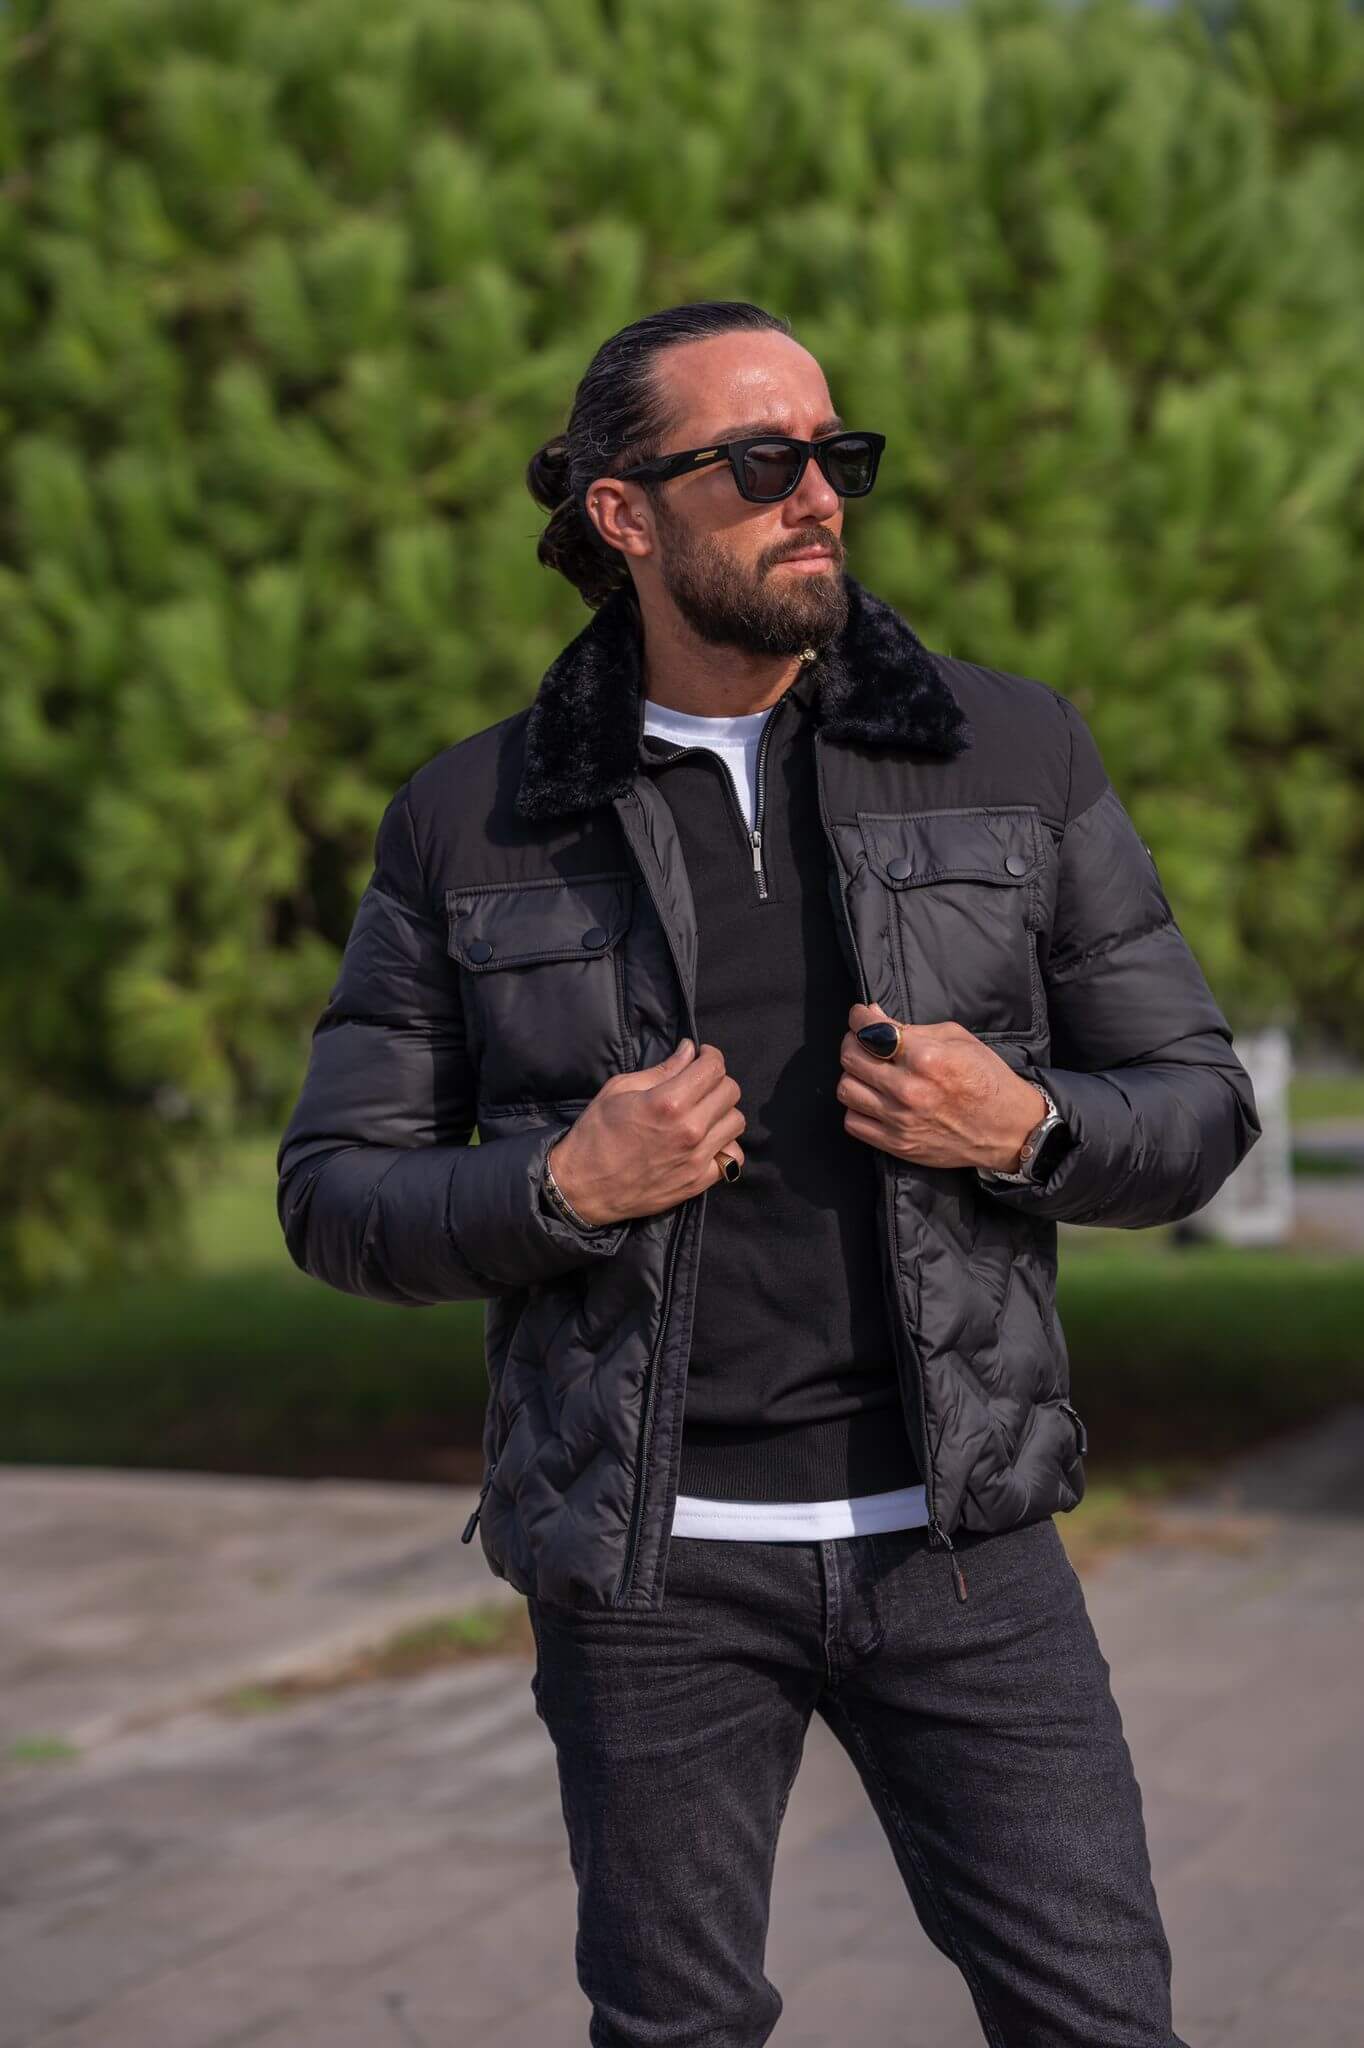 A stylish male model confidently wears our sleek black bomber jacket, exuding urban cool vibes."